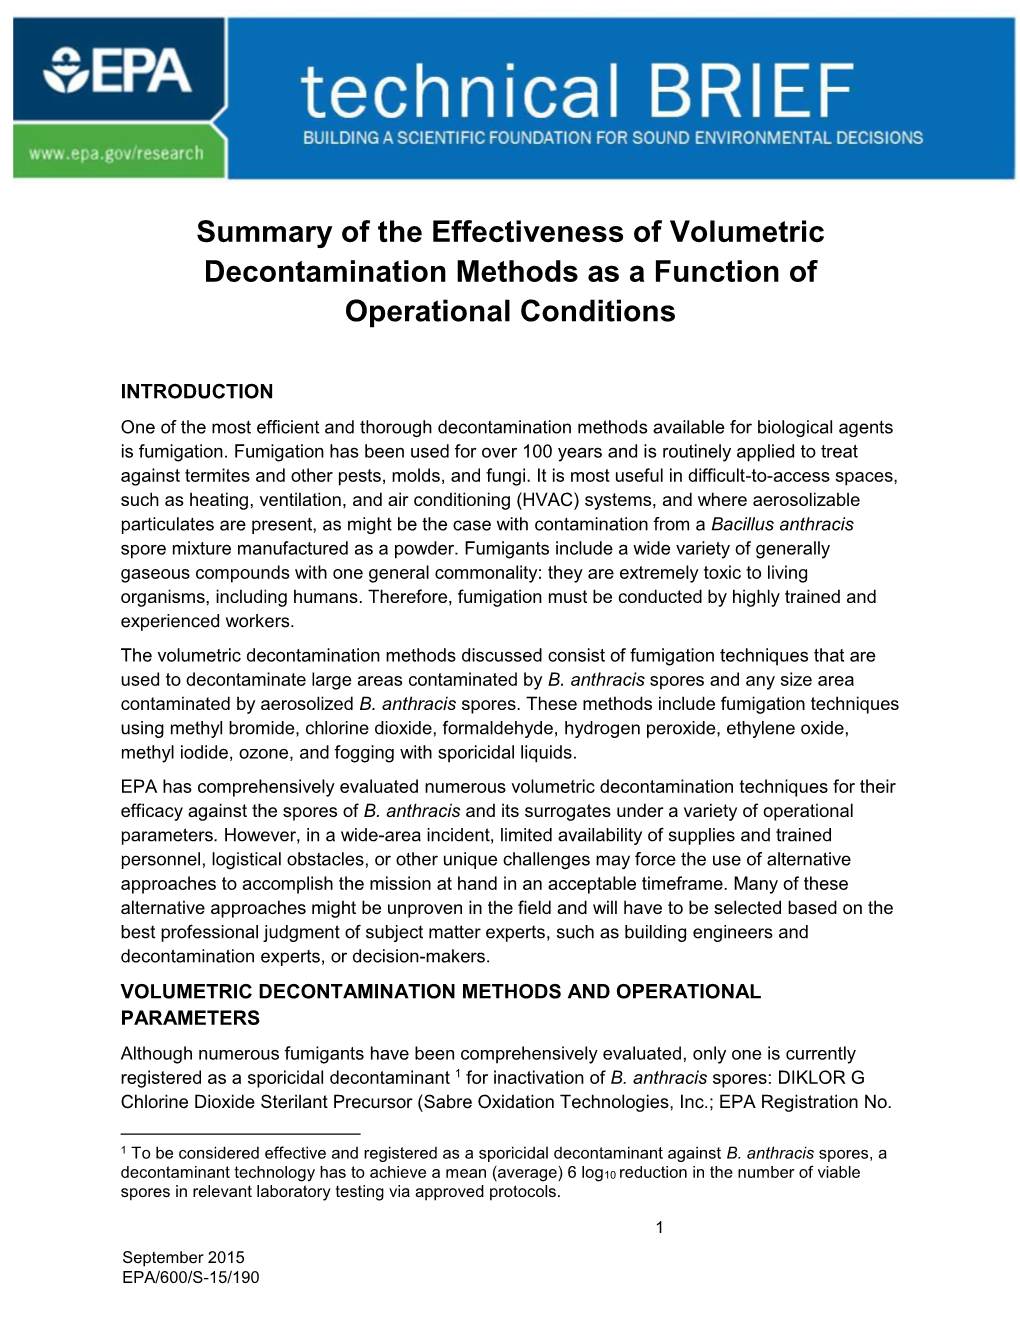 Summary of the Effectiveness of Volumetric Decontamination Methods As a Function of Operational Conditions